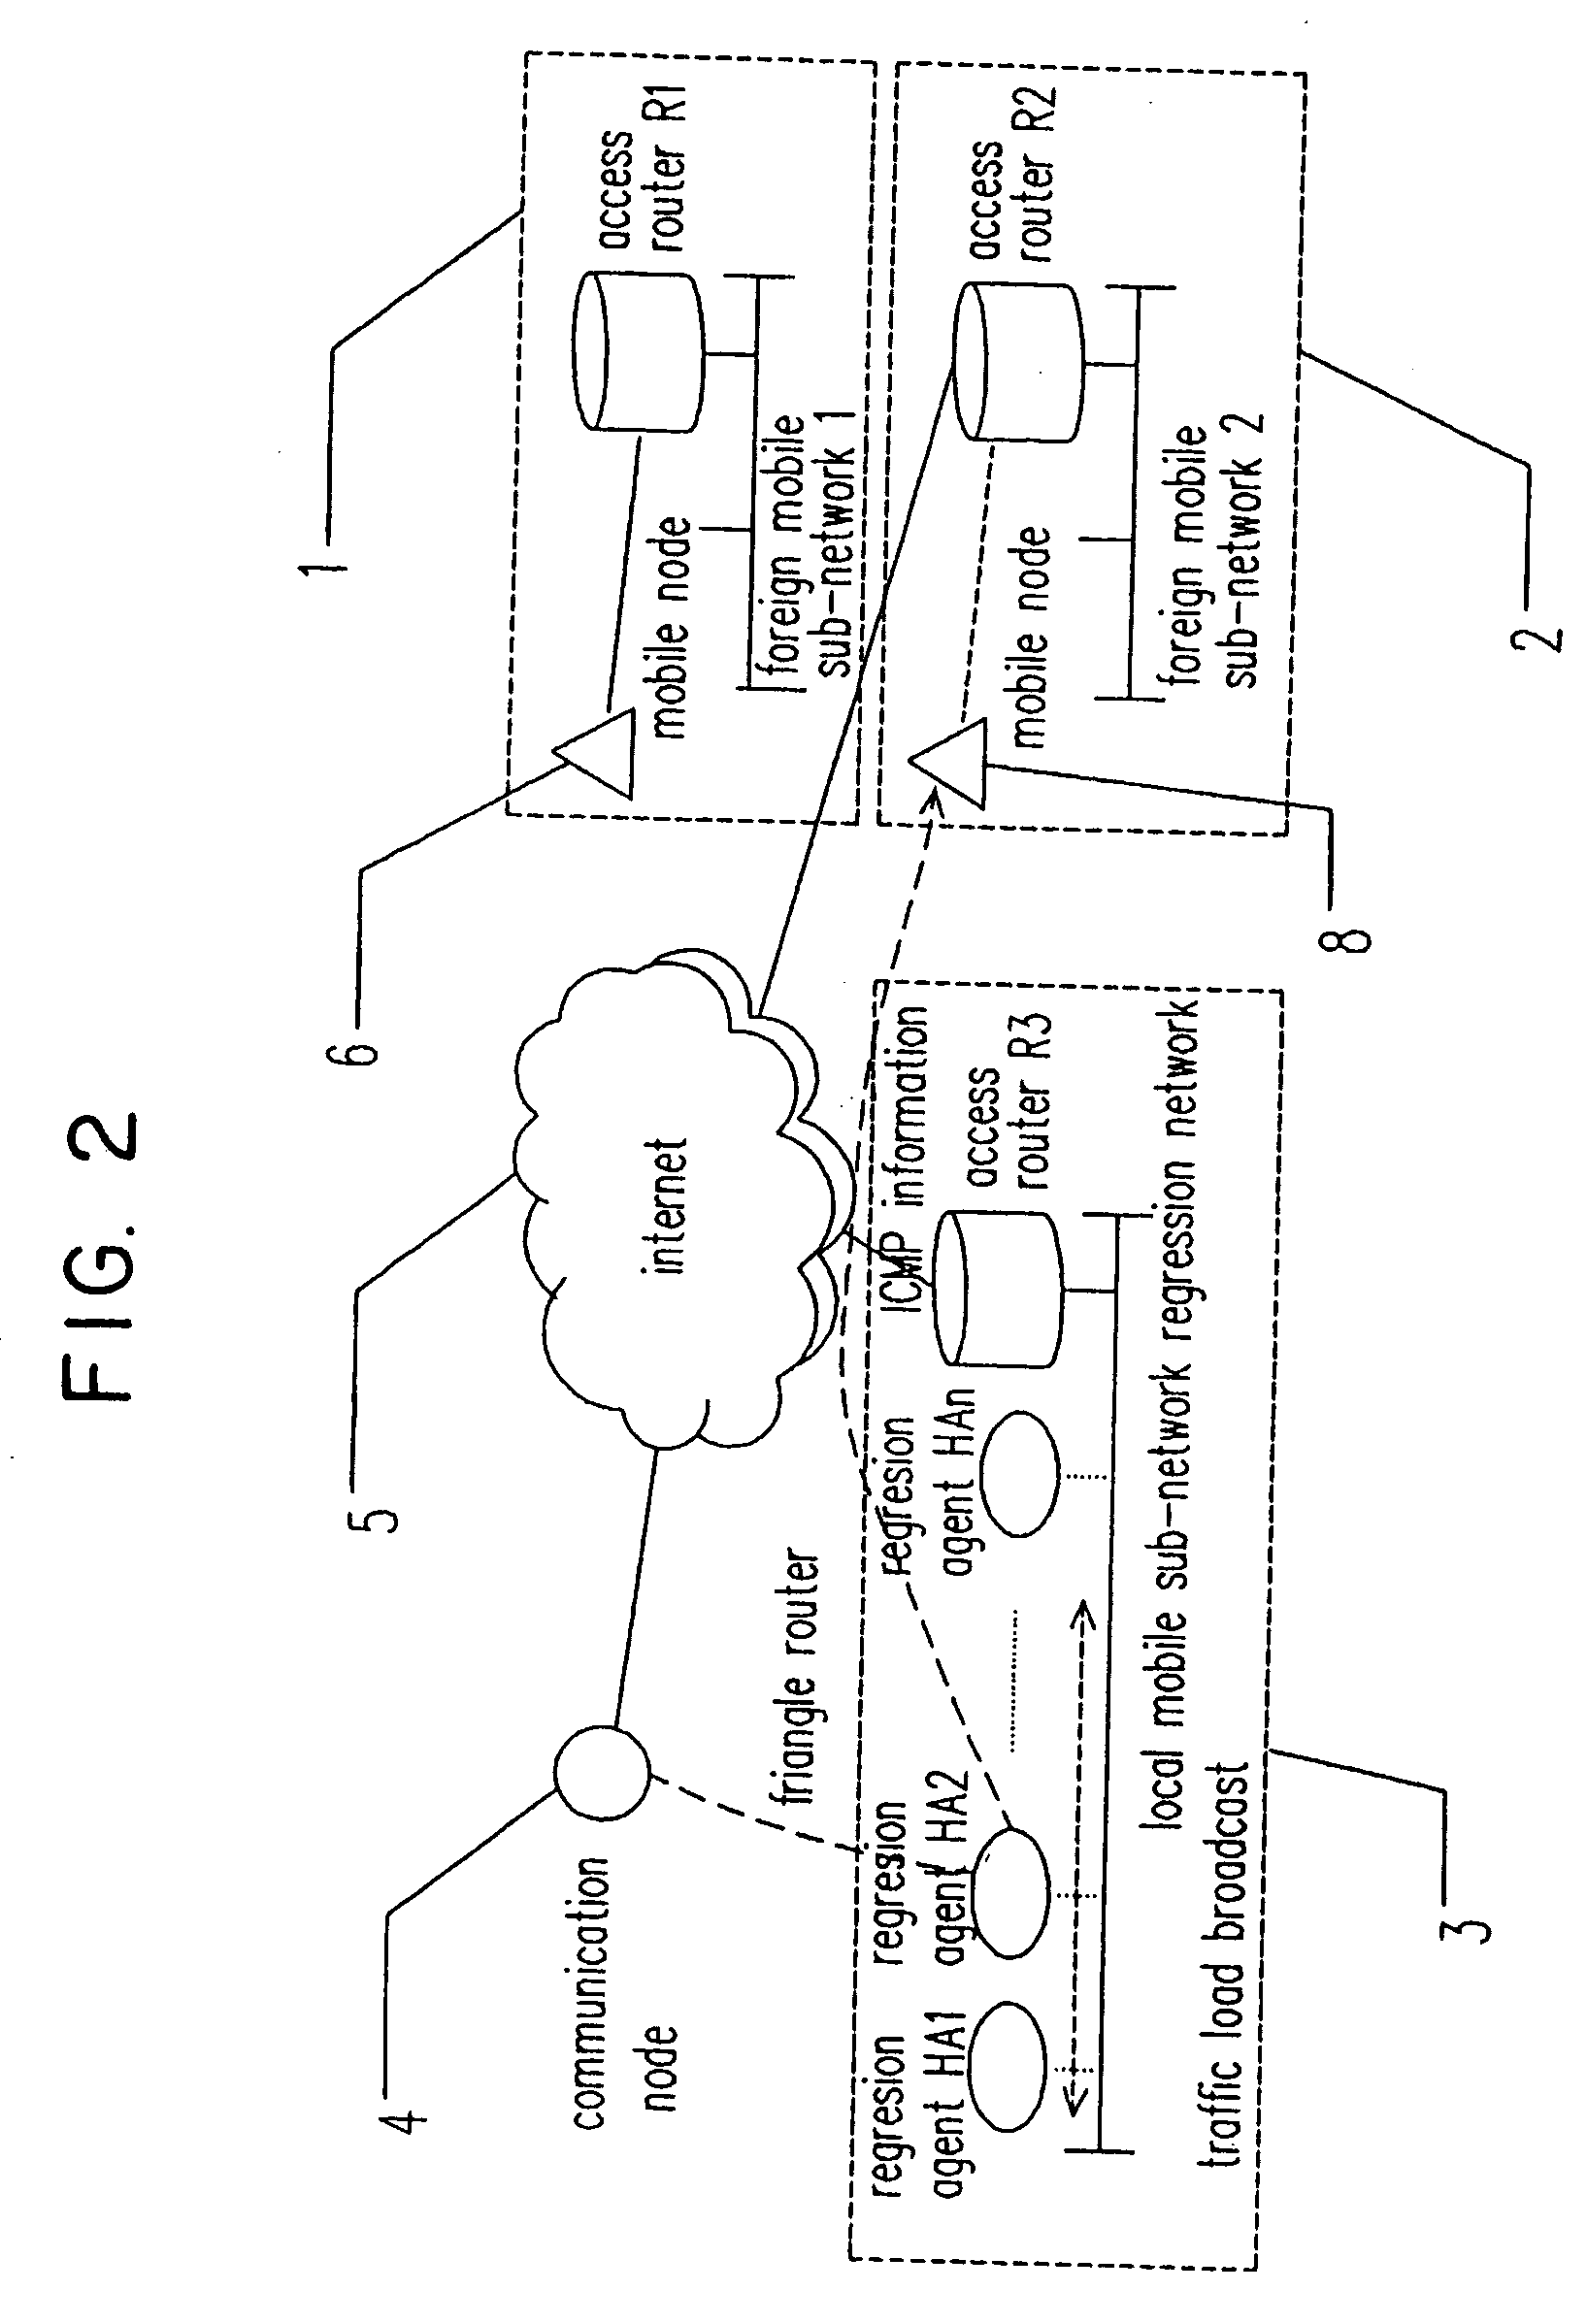 Mobile IPv6 network having multiple home agents and method of load balance